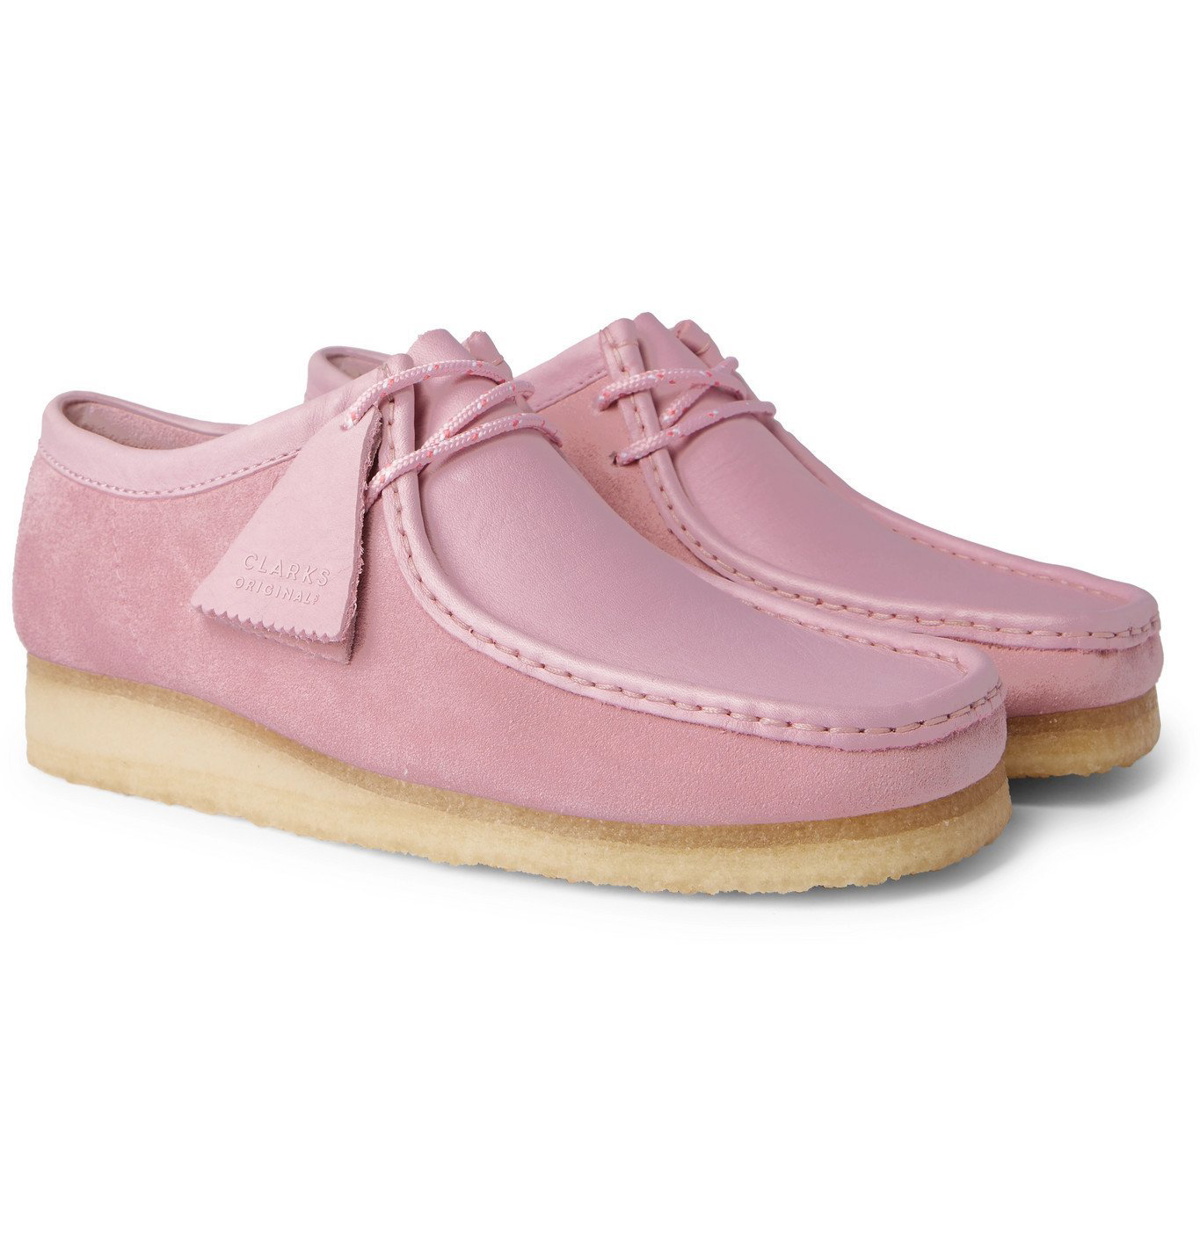 Clarks Wallabee Suede and Leather Boots Pink Clarks Originals